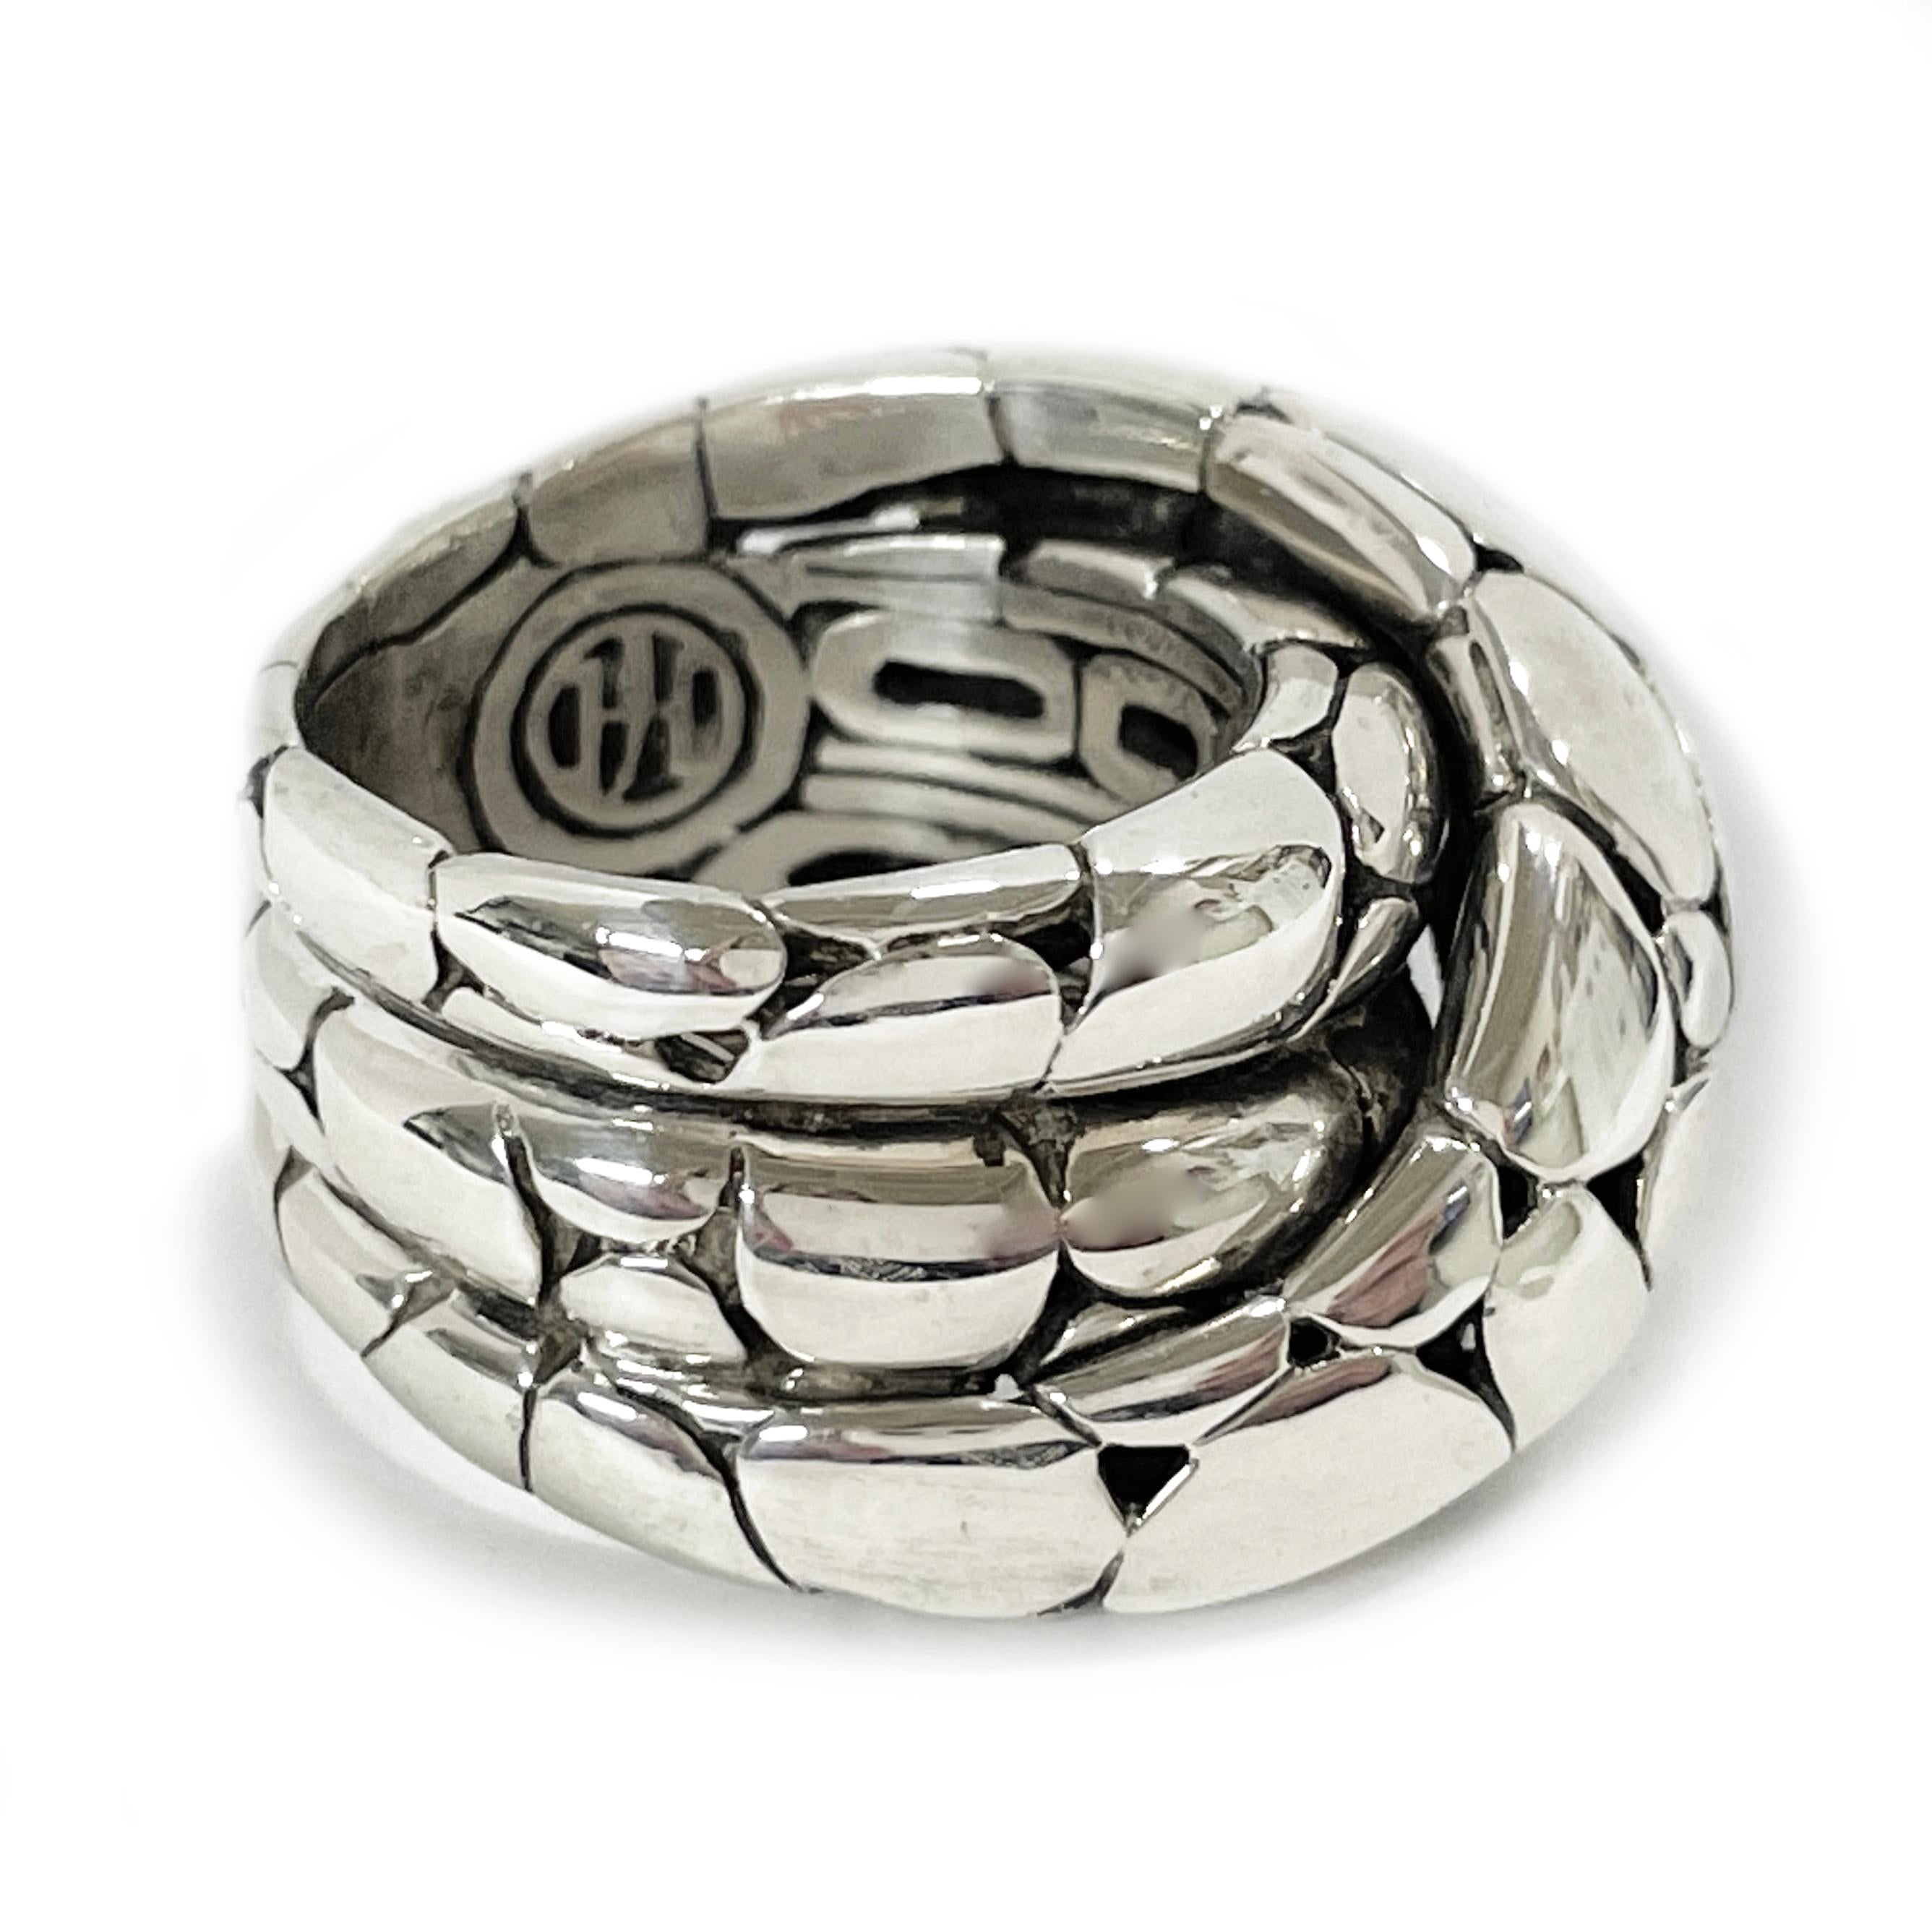 John Hardy Sterling Silver Kali Twist Ring. A lovely wide band ring from Hardy's Kali Collection. The ring consists of overlapping twisting coils and ranges in size from 9-13mm wide. Stamped on the inside of the band is the JH logo and 925. The ring